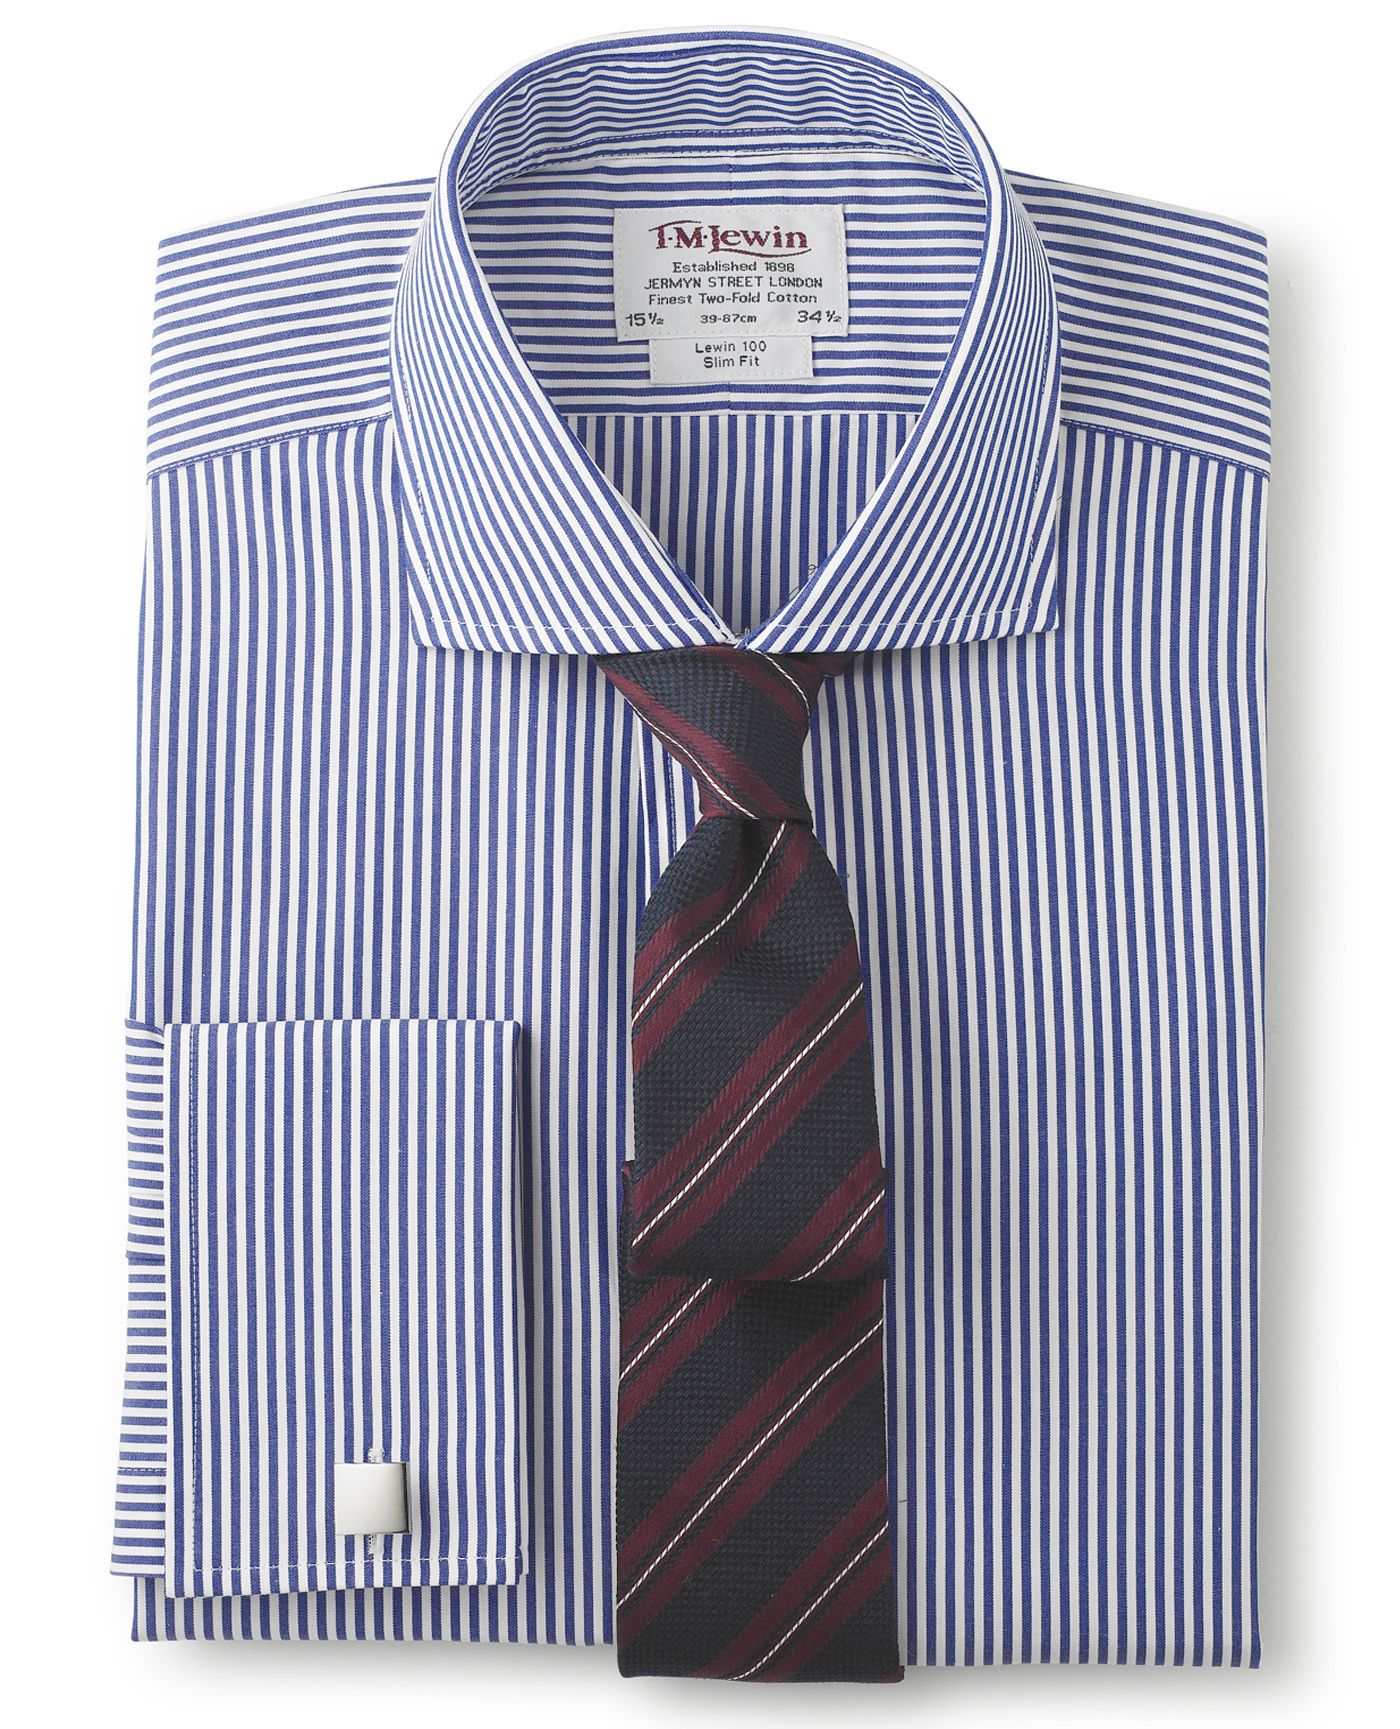 TM Lewin 4 Shirts Offer – Above The Ankles